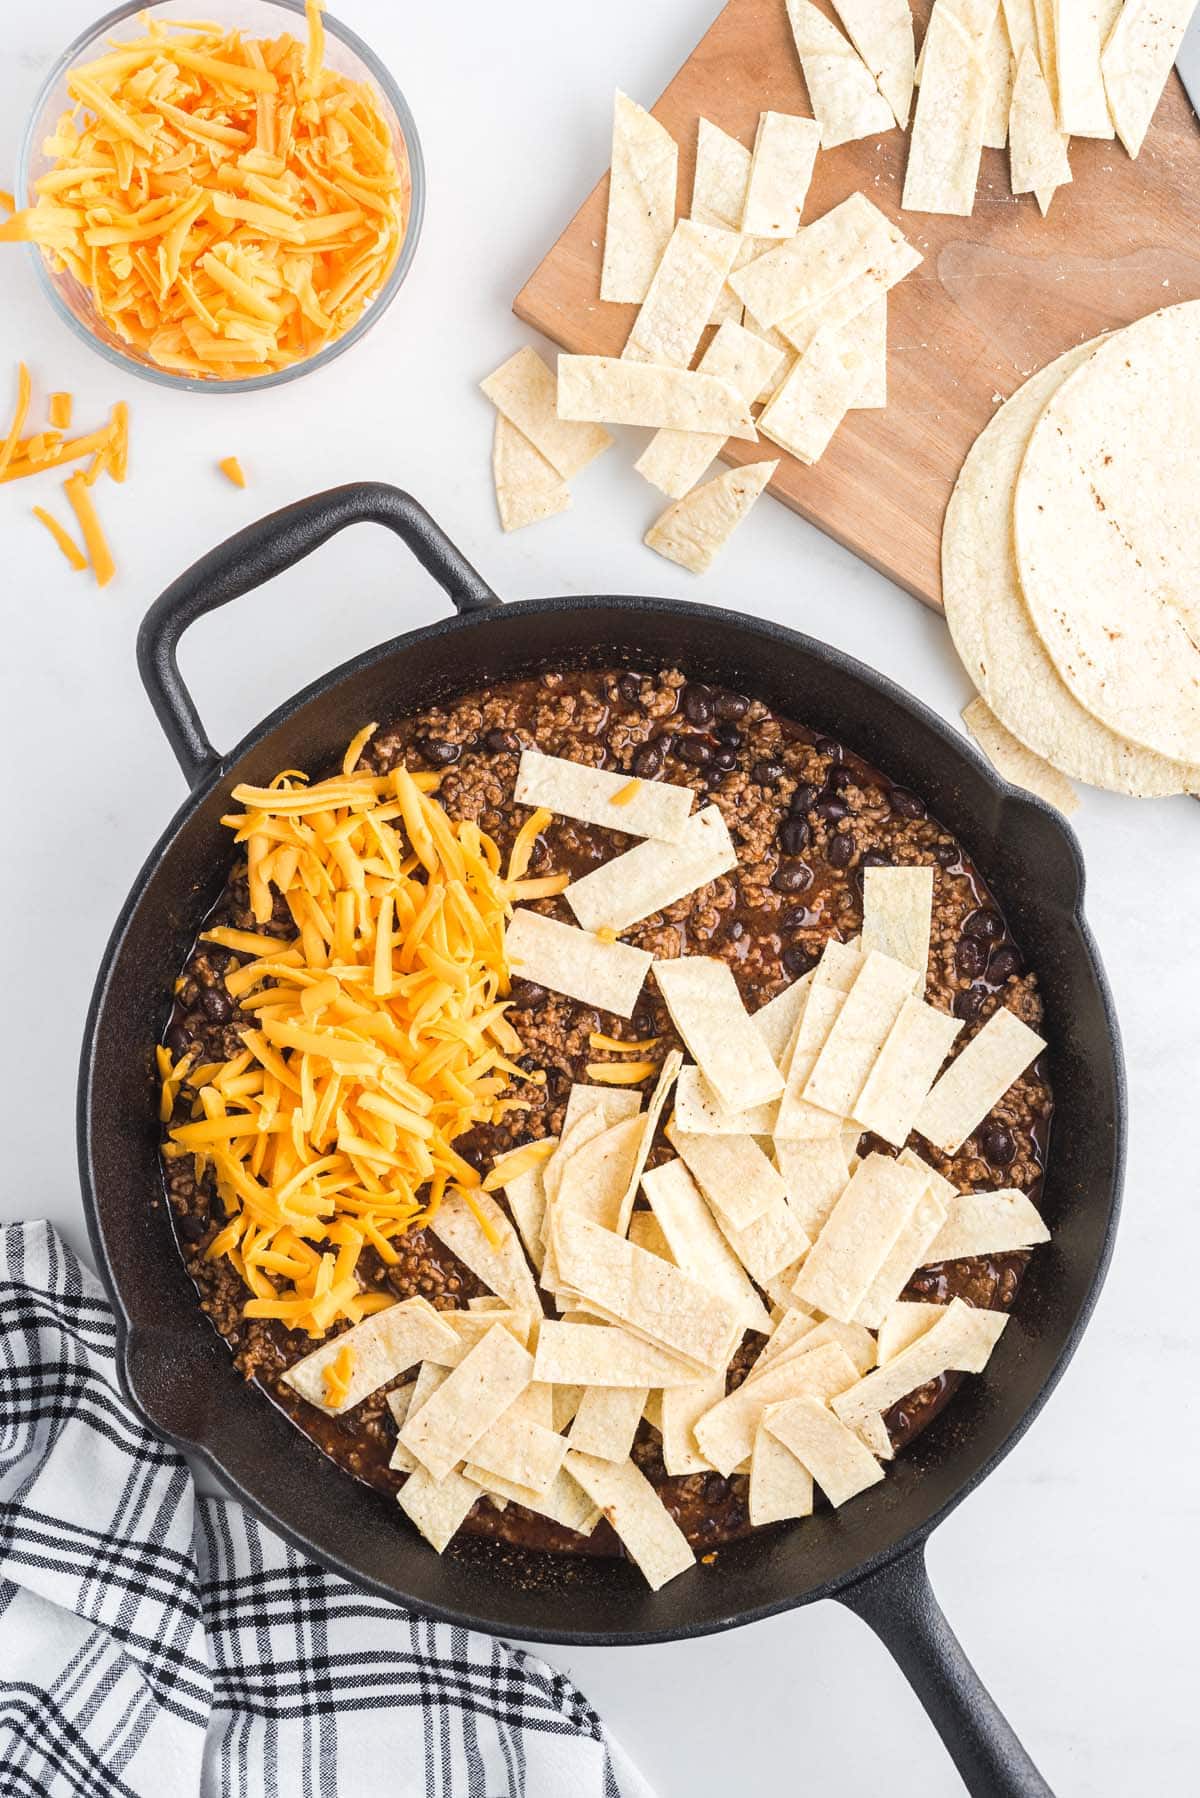 add cheese and tortillas in the skillet